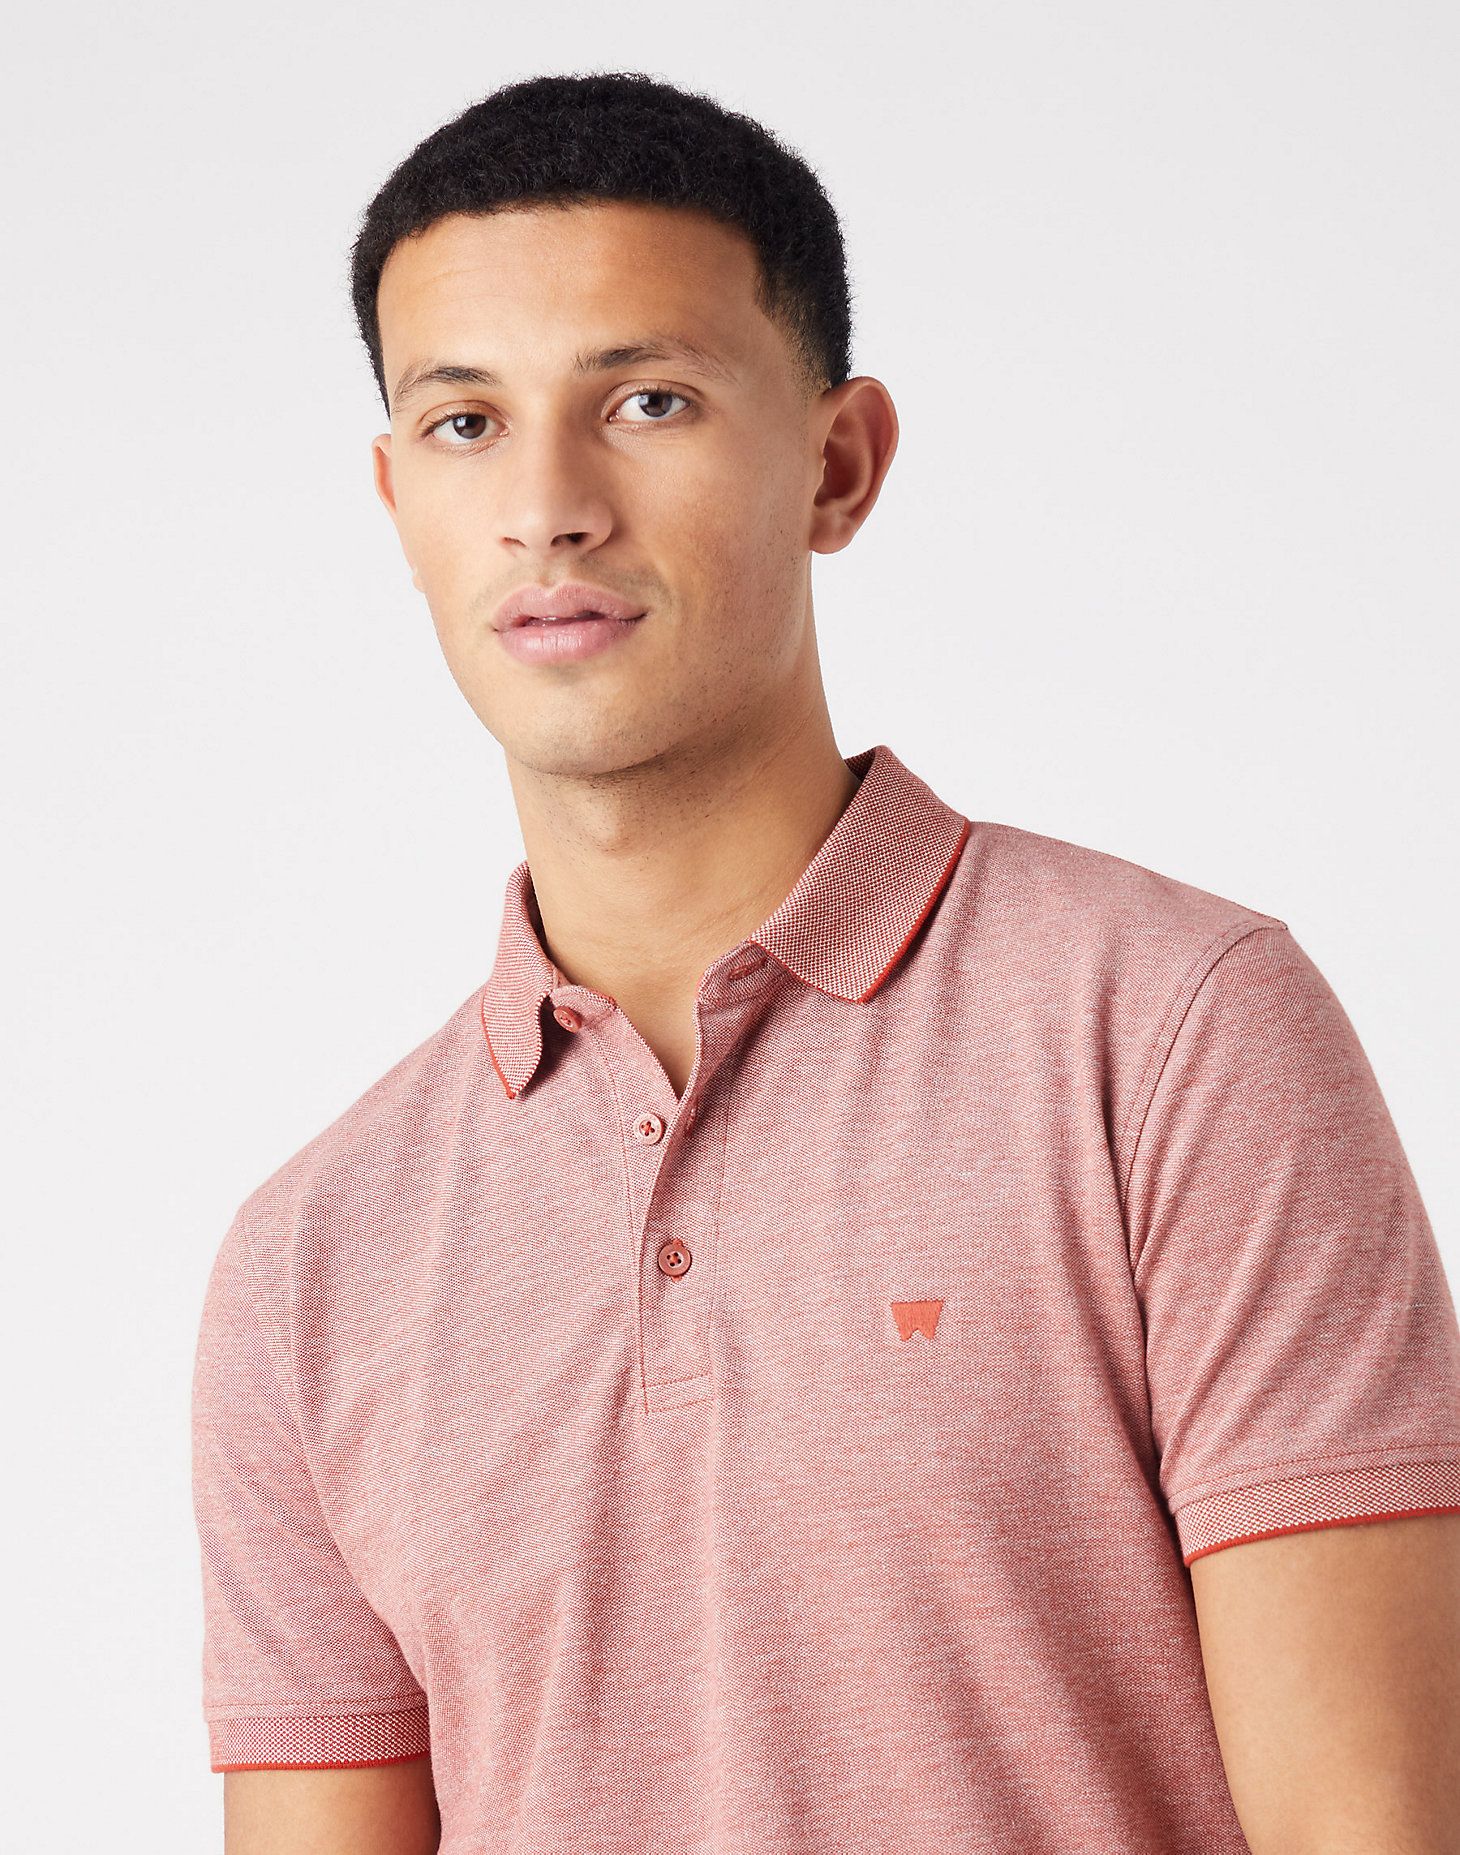 Refined Polo in Etruscan Red alternative view 3